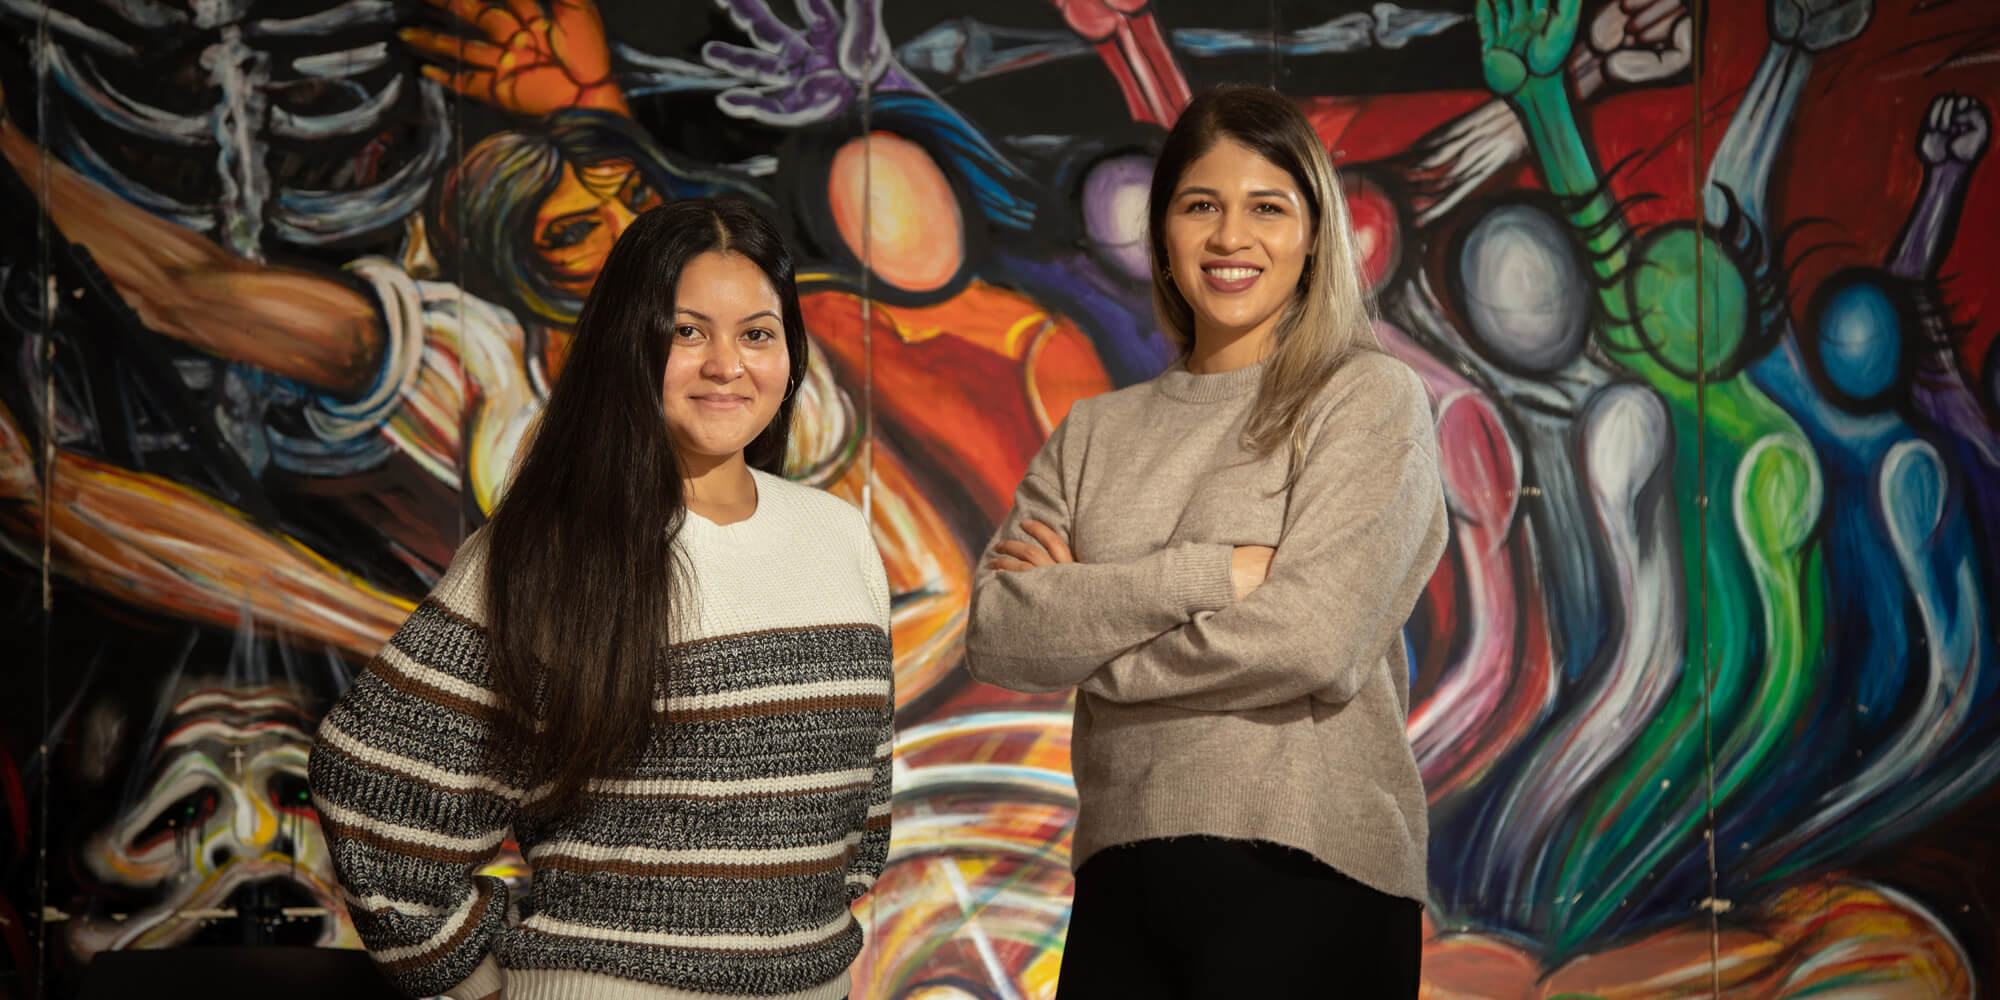 Doctoral researchers Samiksha Singh (left) and Isis Fraústo-Vicencio formed a mentoring program in the Environmental Sciences department modeled after Chicano Link.